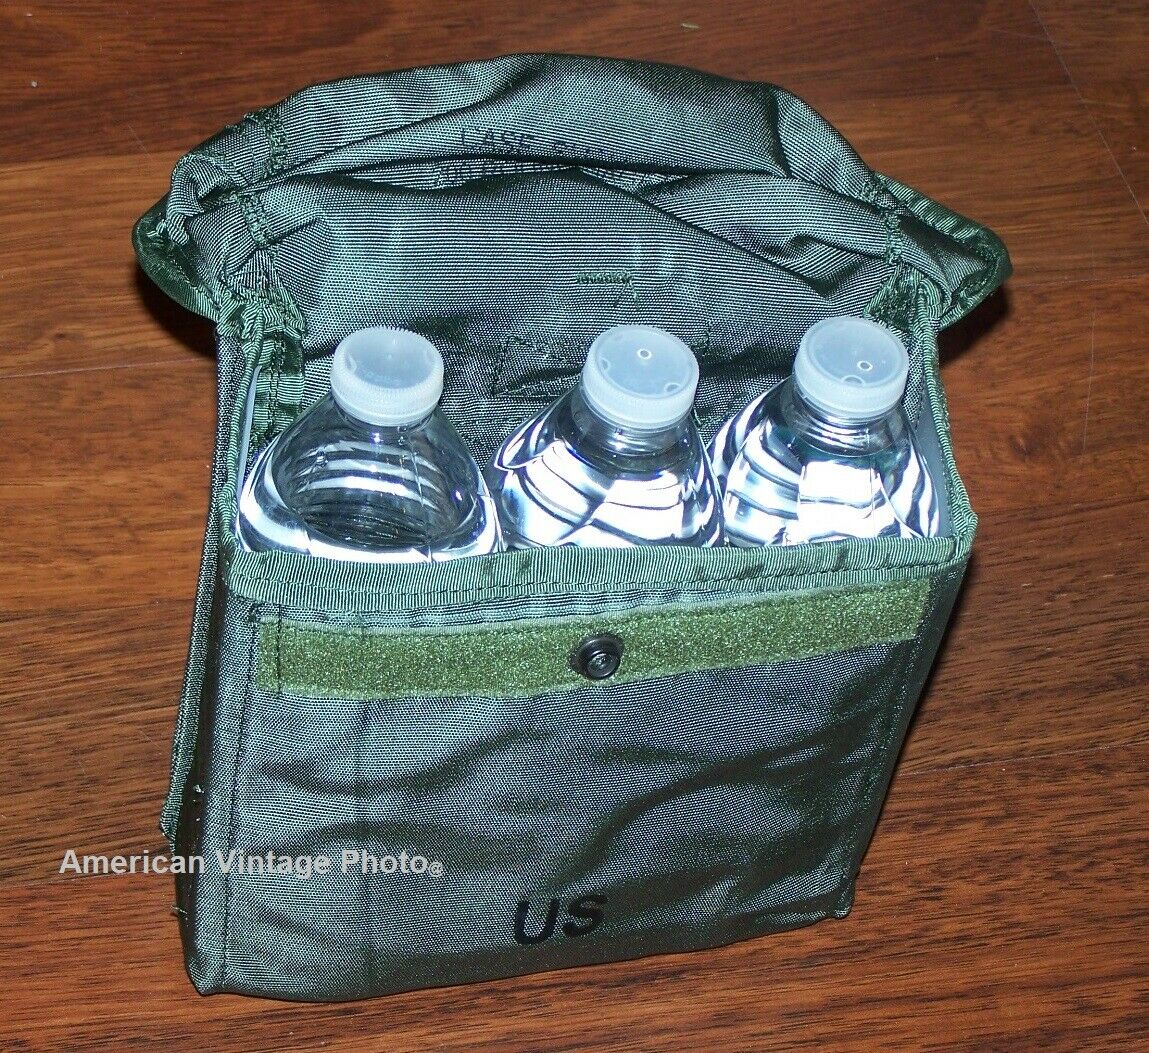 Case Pouch Sustainment General Purpose Utility Ration Ammo Saw Water Alice W P38